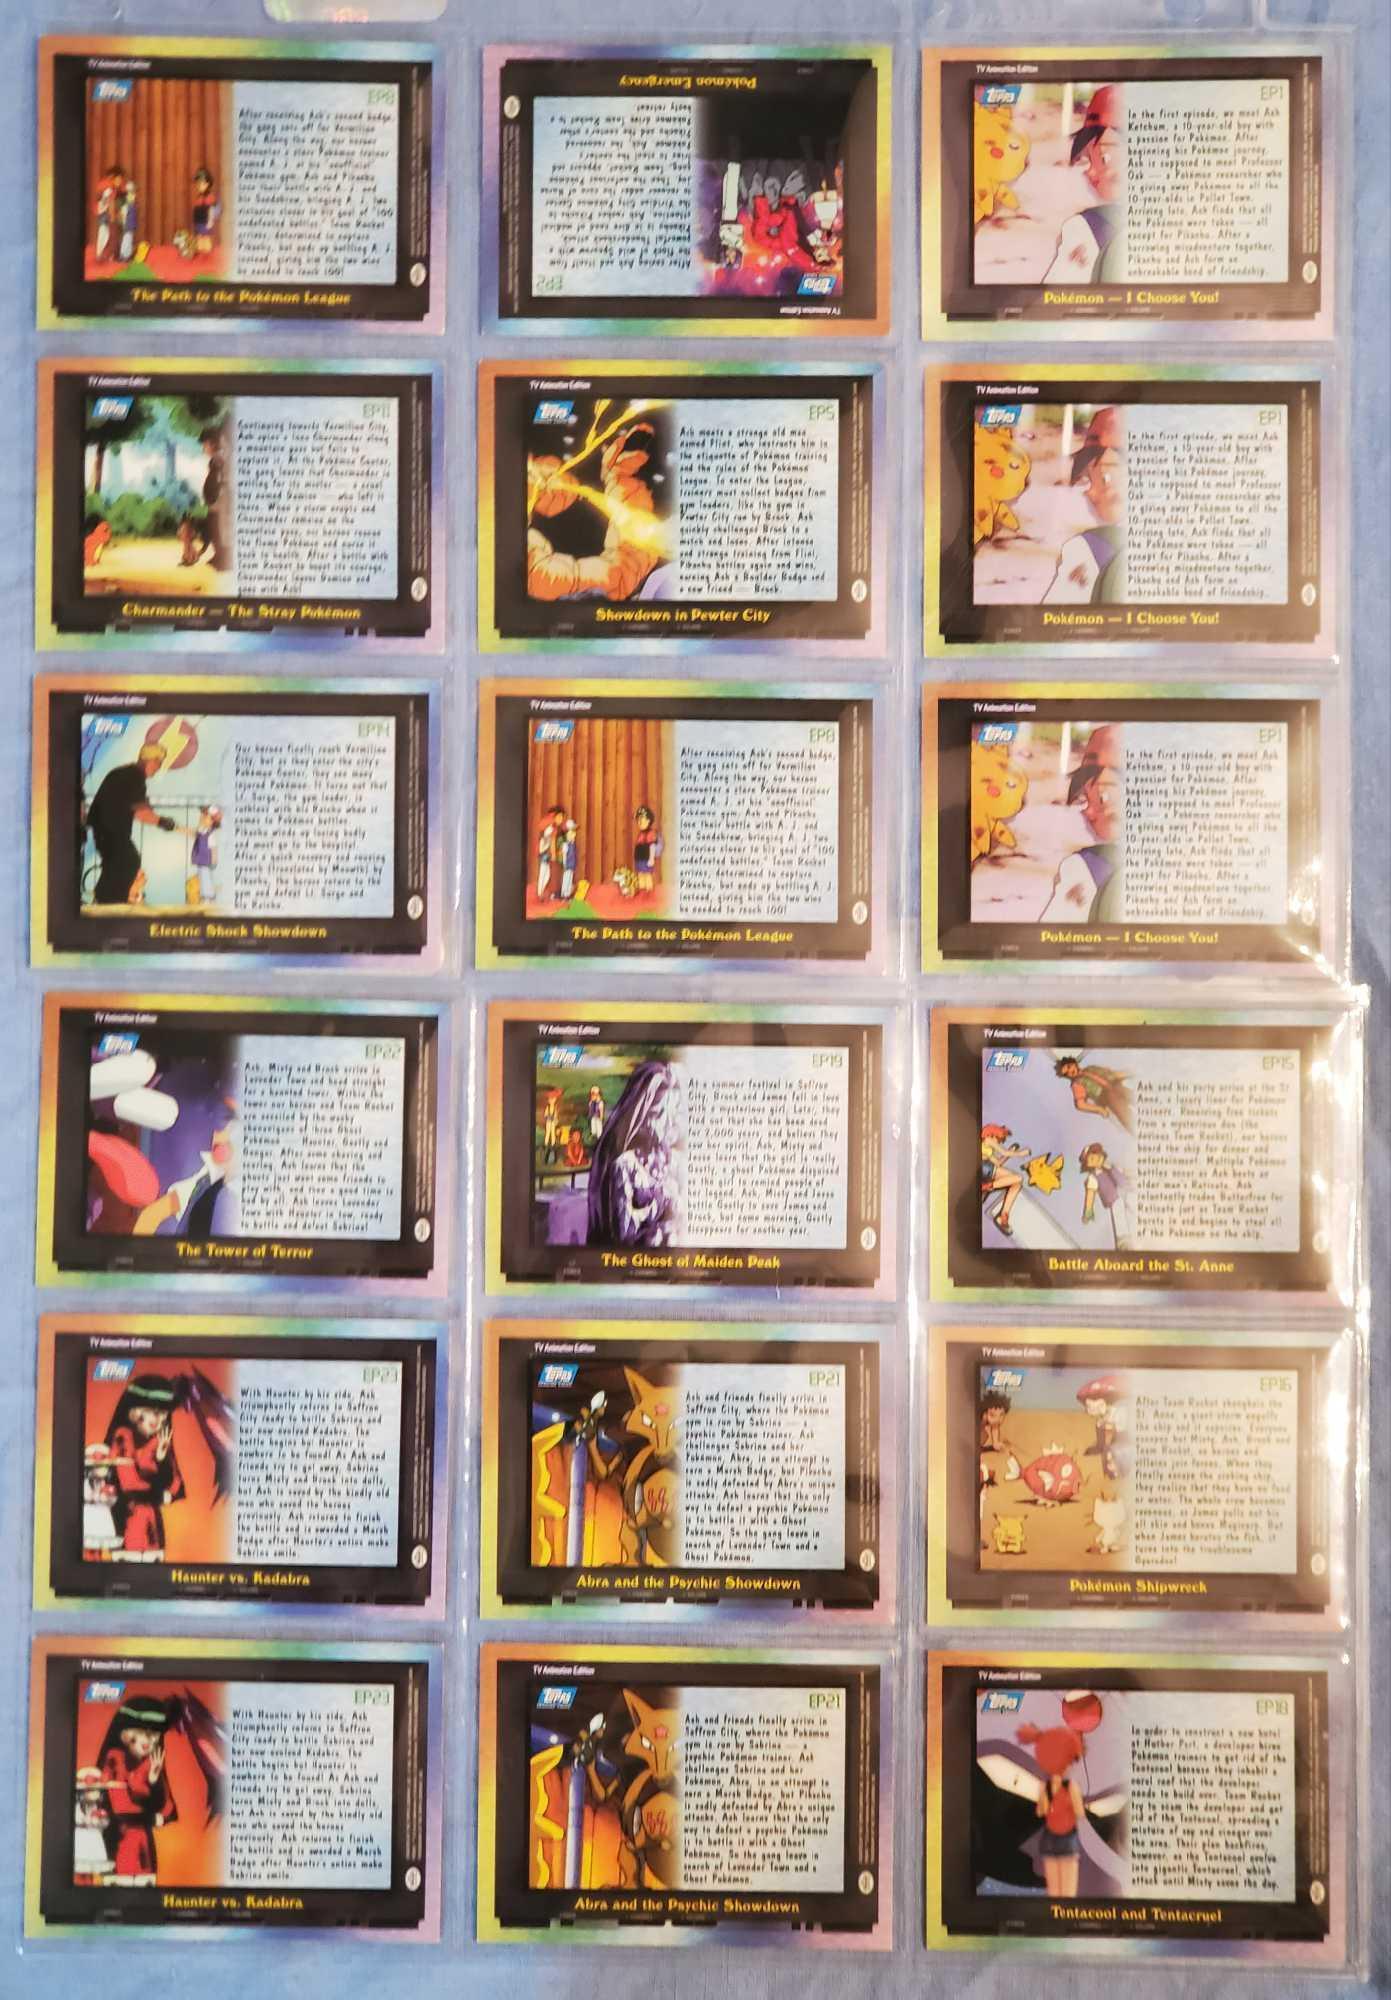 Album of Approx 250 1999 to 2000 Pokemon The TV Animation Series and Movie Cards by Topps